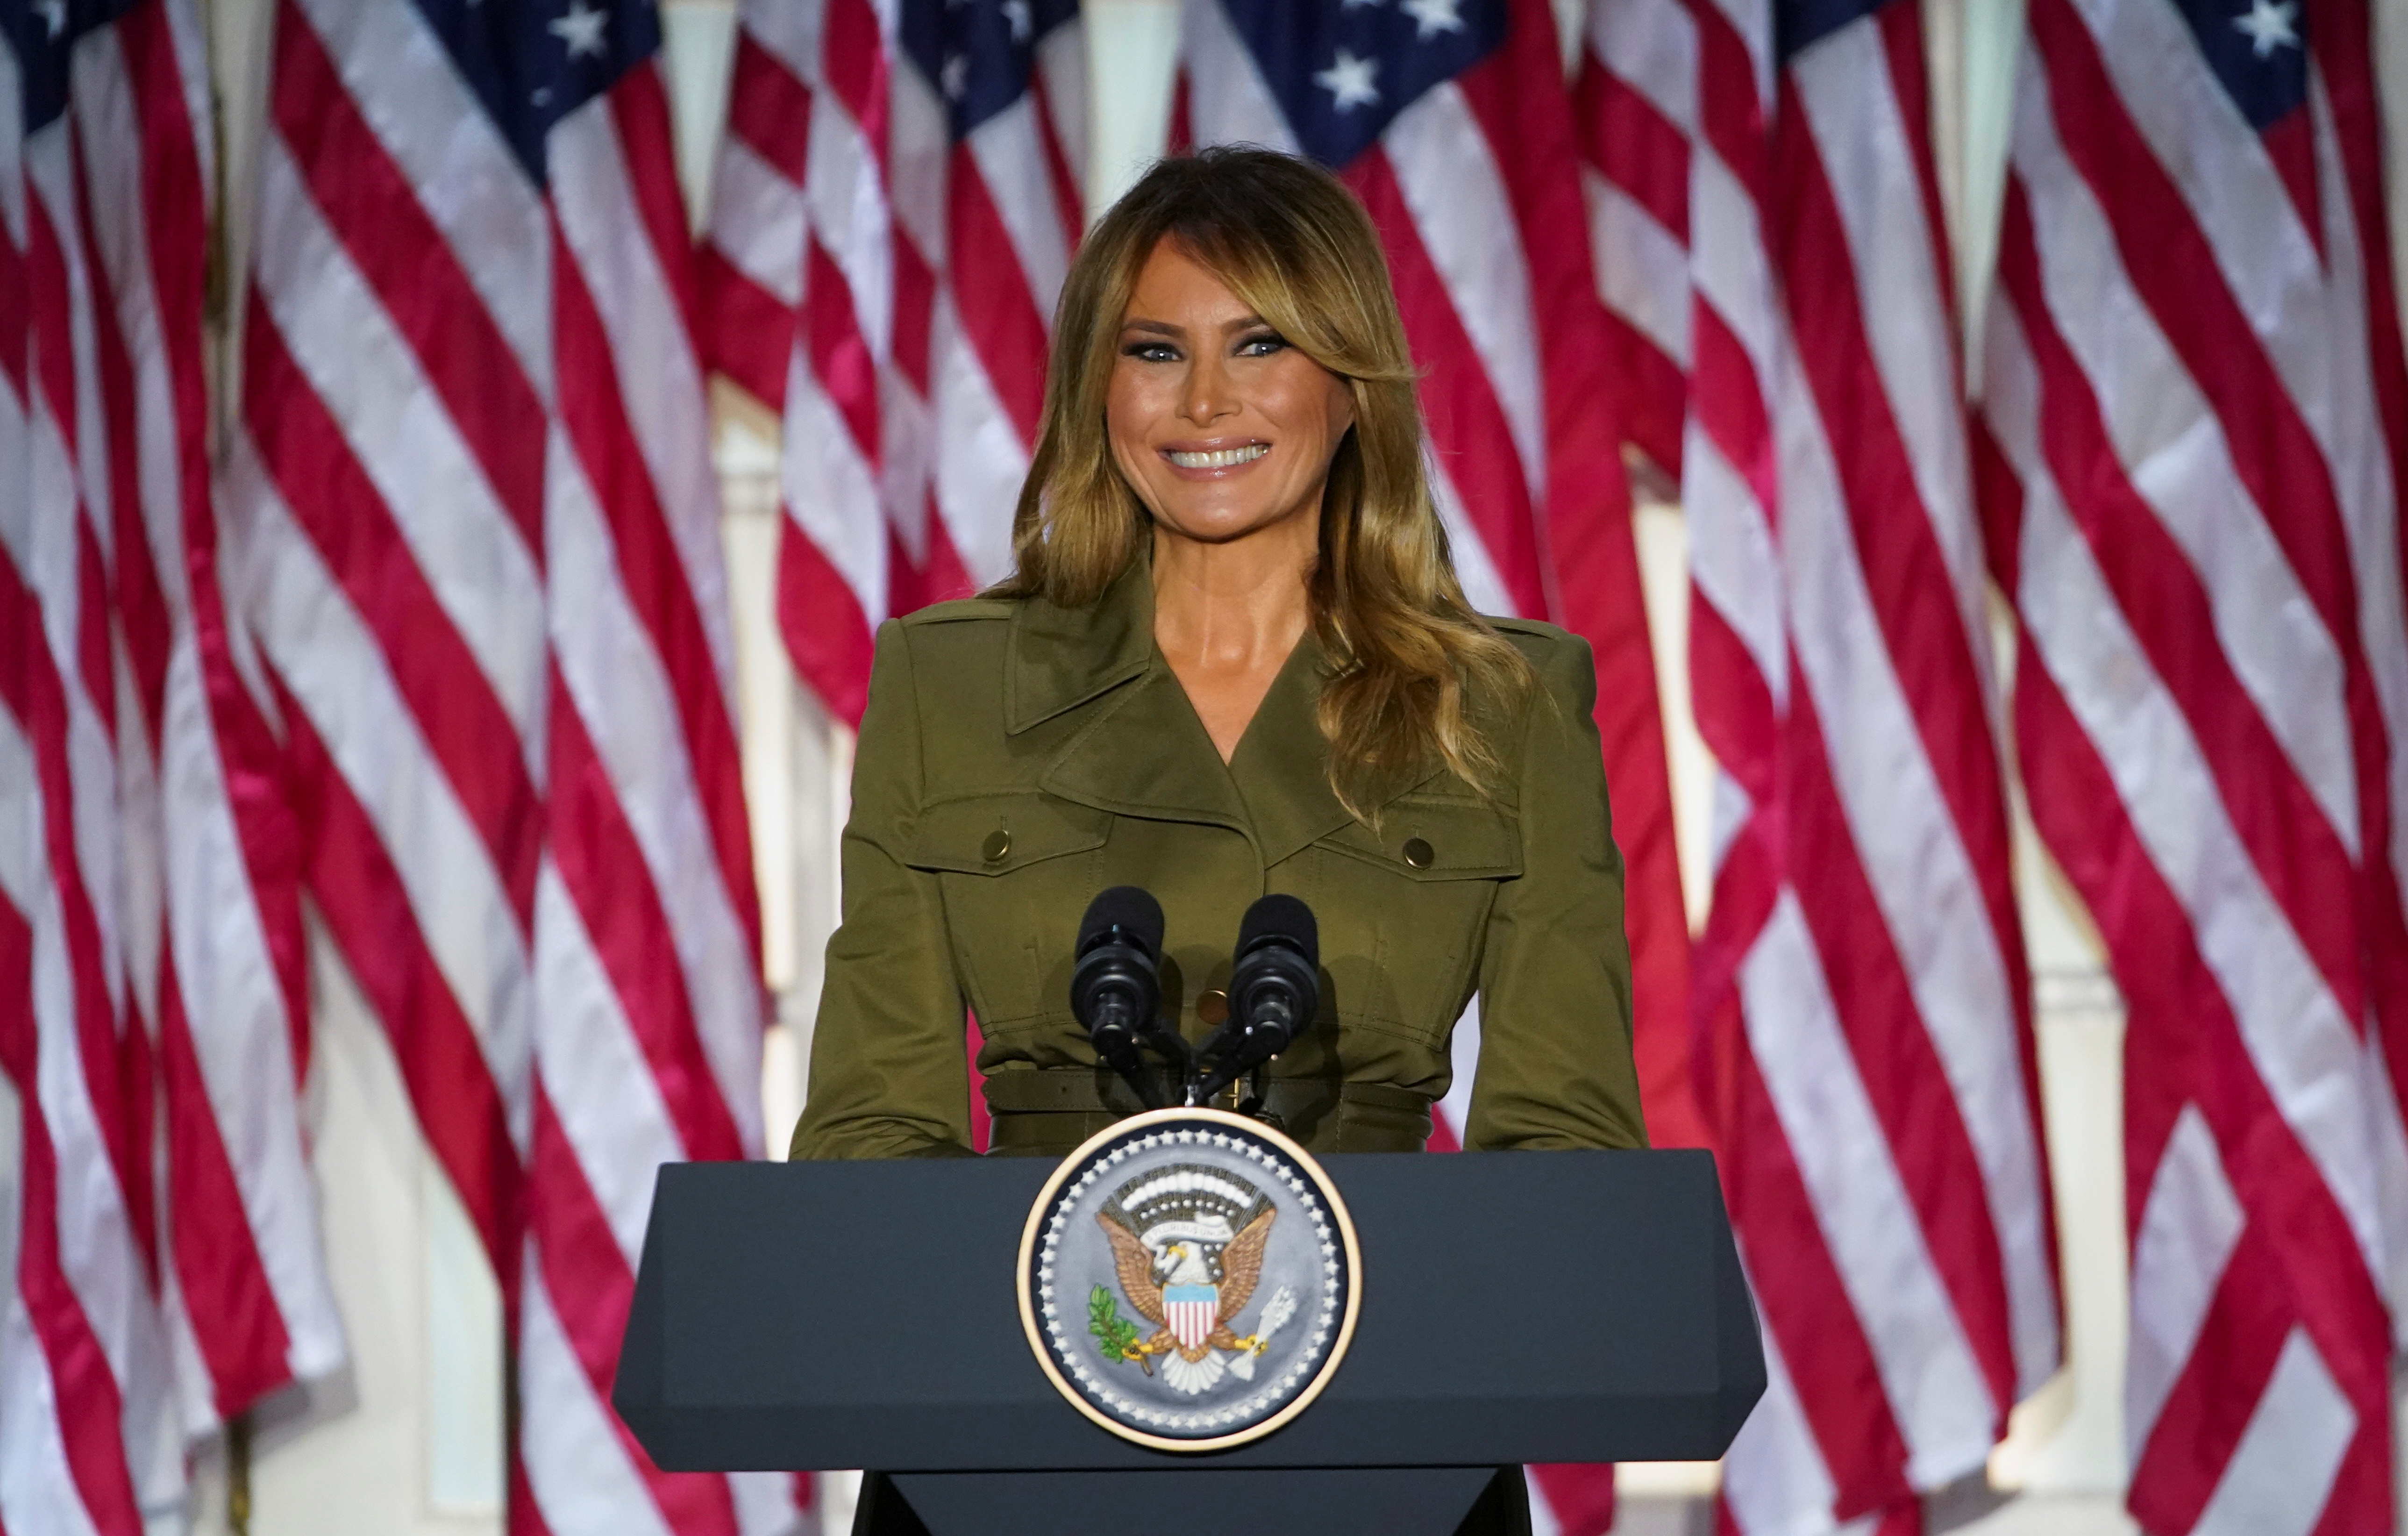 U.S. first lady Melania Trump delivers her live address to the largely virtual 2020 Republican National Convention from the Rose Garden of the White House in Washington, U.S., August 25, 2020. REUTERS/Kevin Lamarque